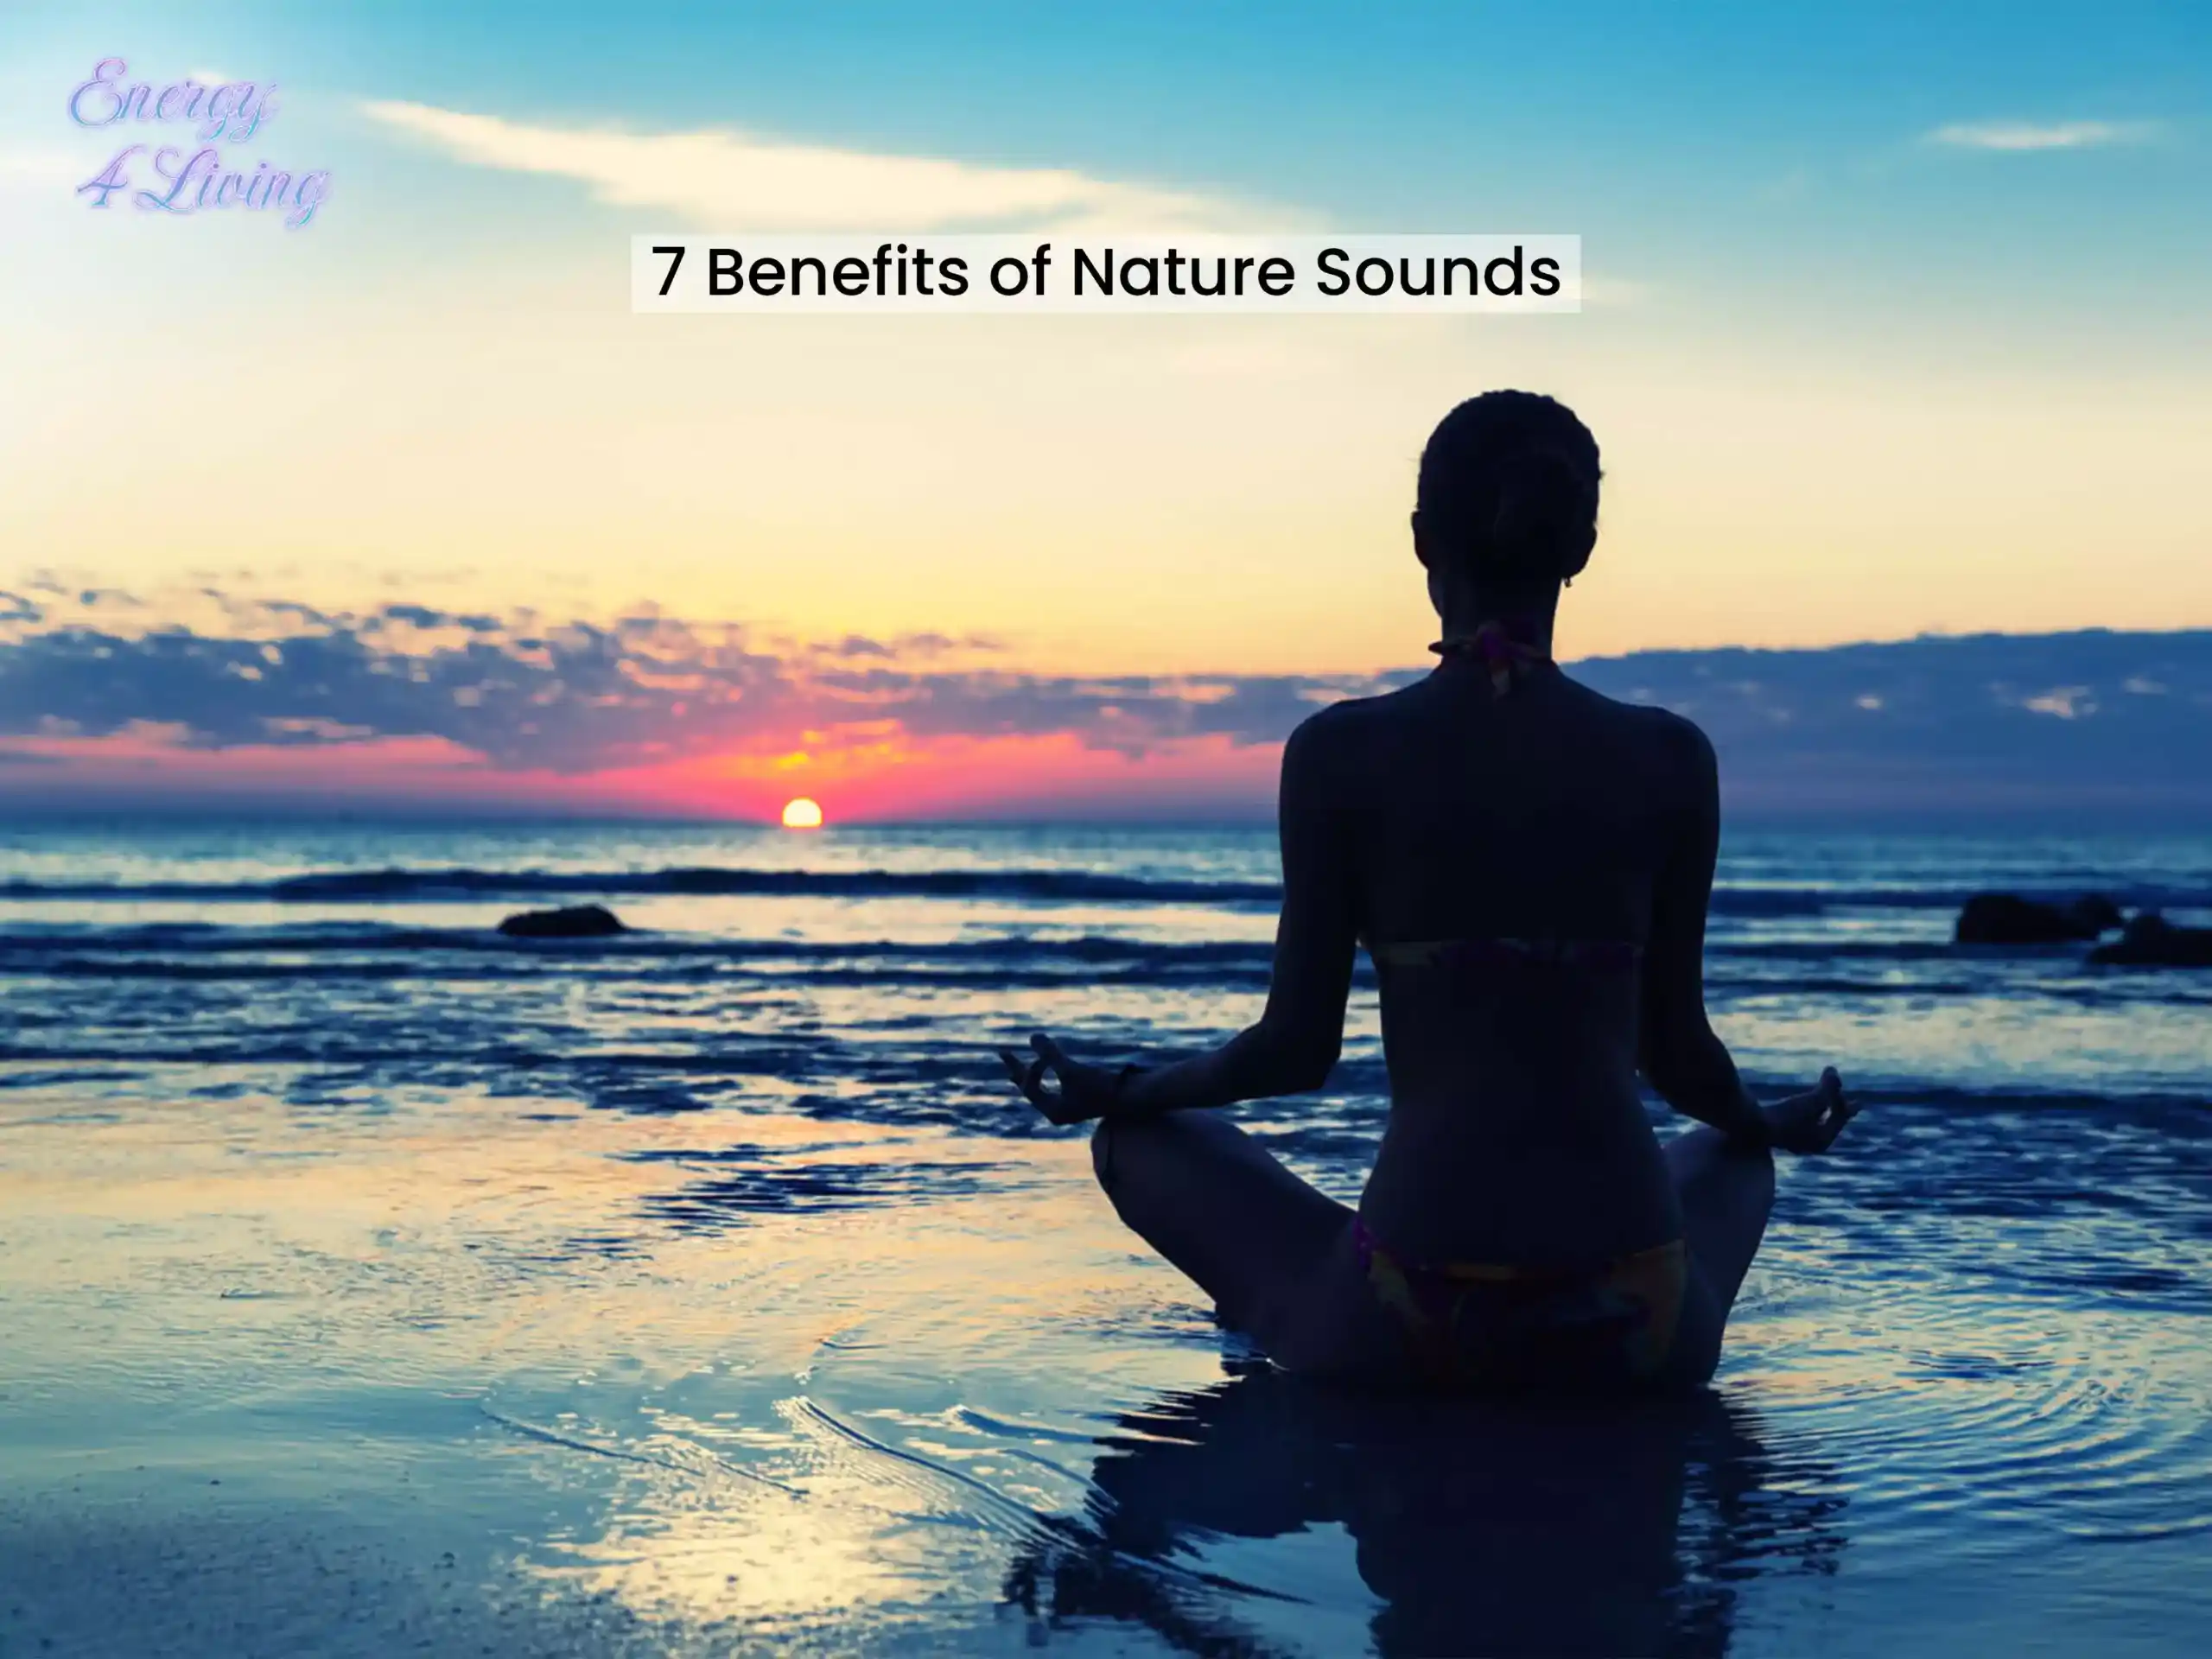 7 Benefits of Nature Sounds